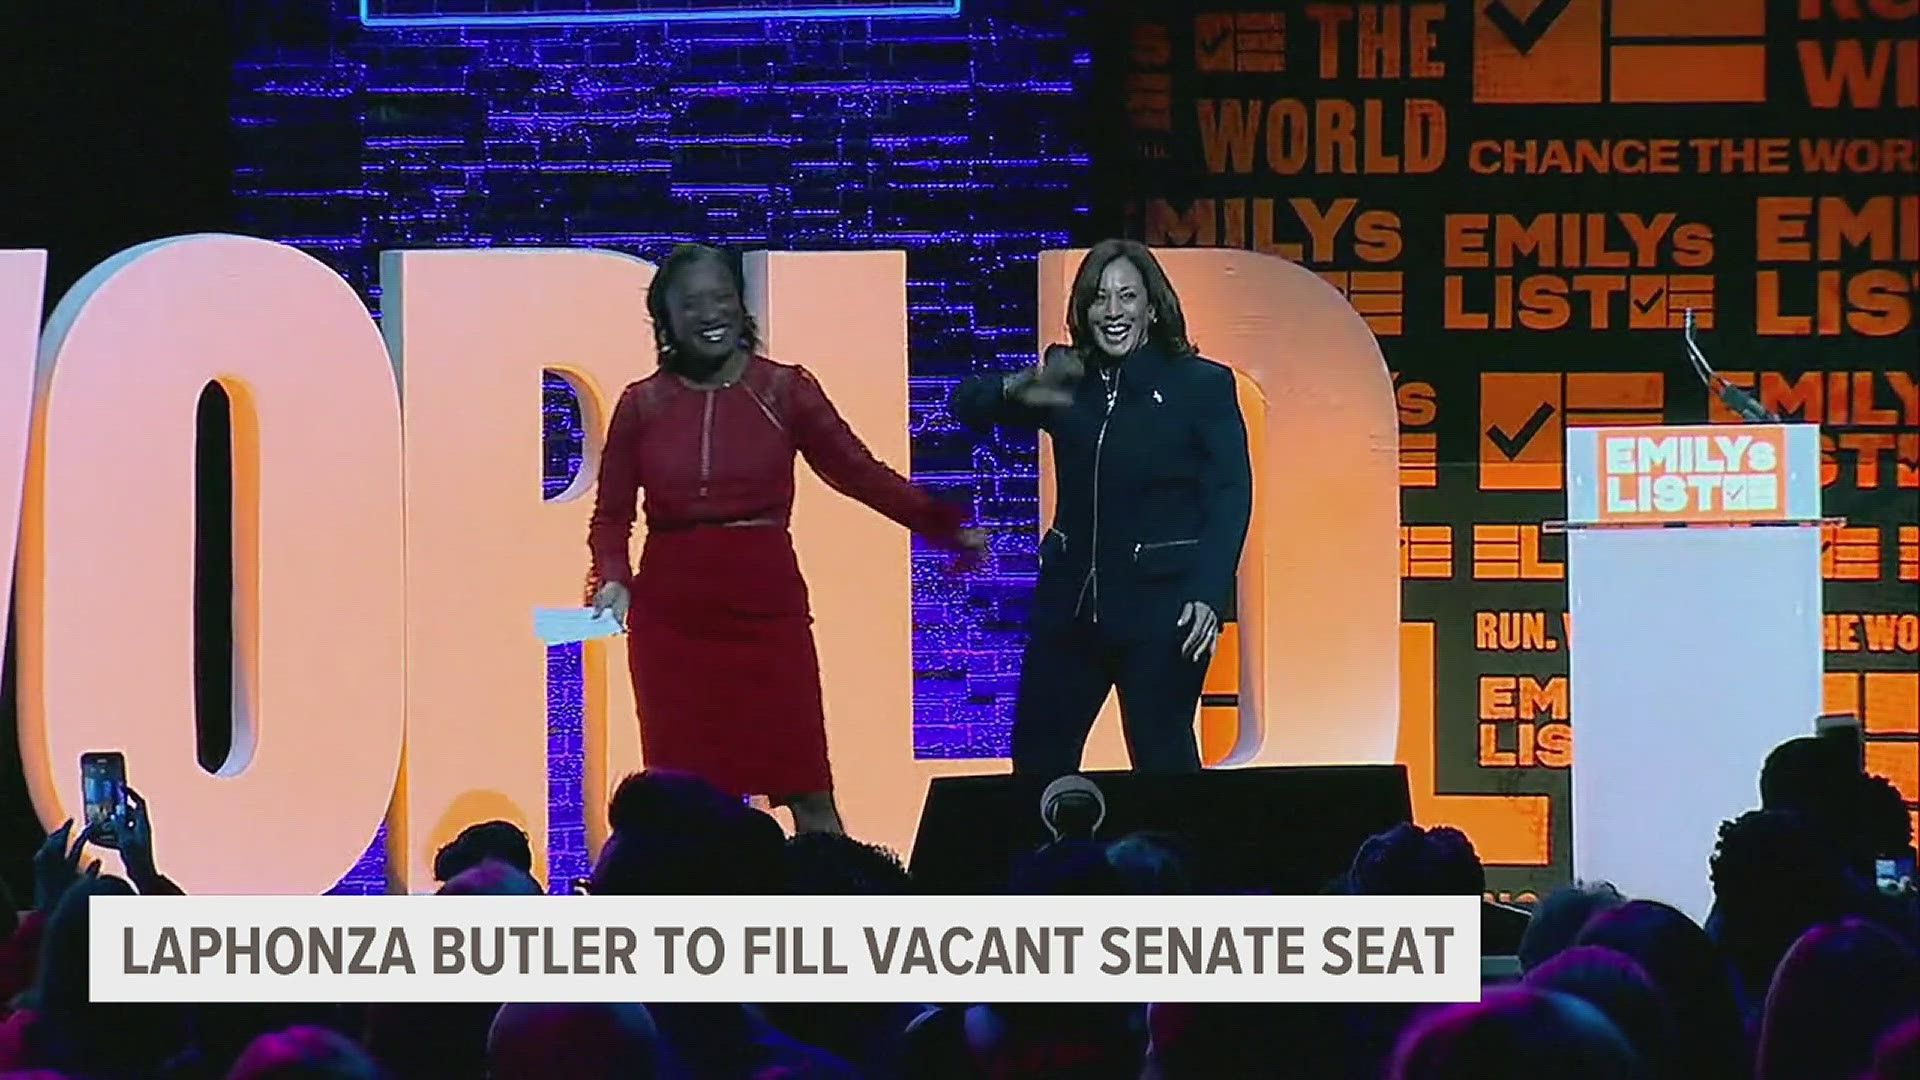 Laphonza Butler had been an advisor to Kamala Harris during her 2020 Presidential campaign, and was a labor leader.